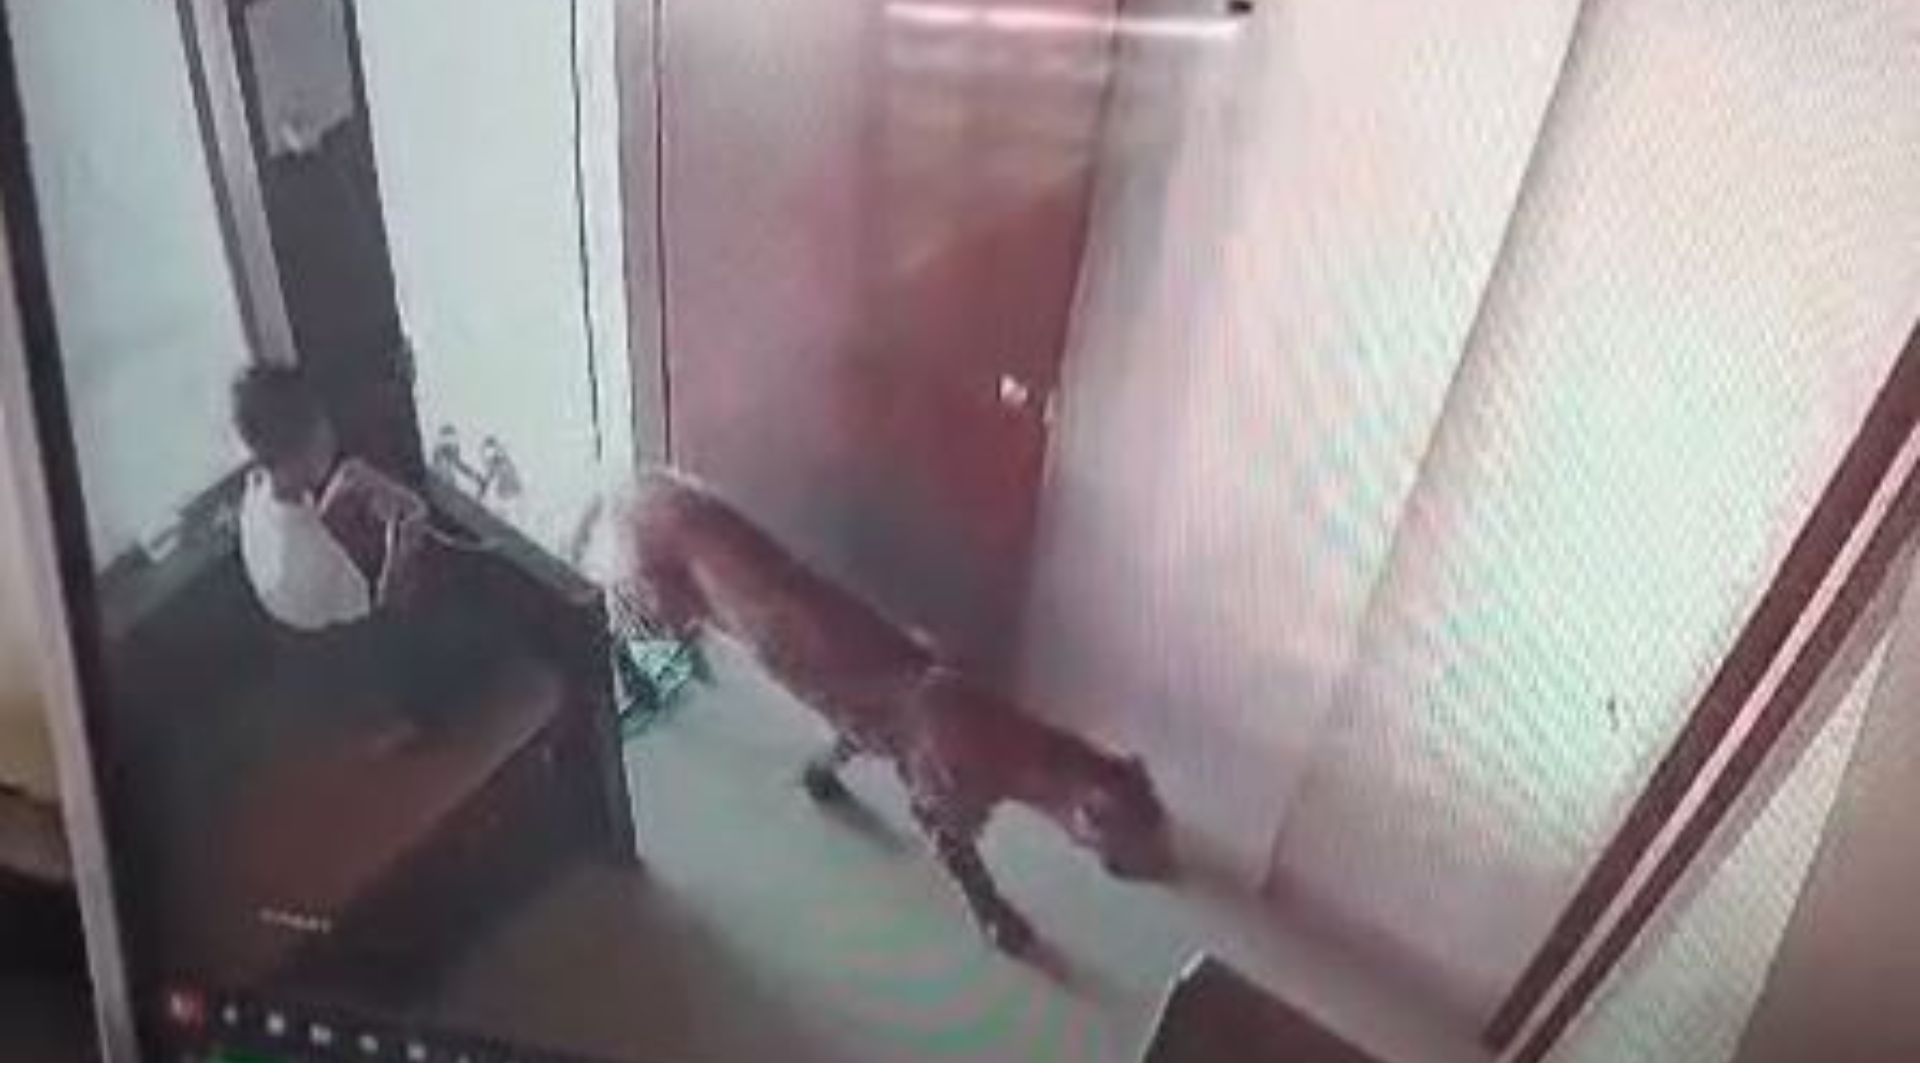 Seeing A Leopard Entering Into Room, 13-Year-Old Quickly Locked It Inside